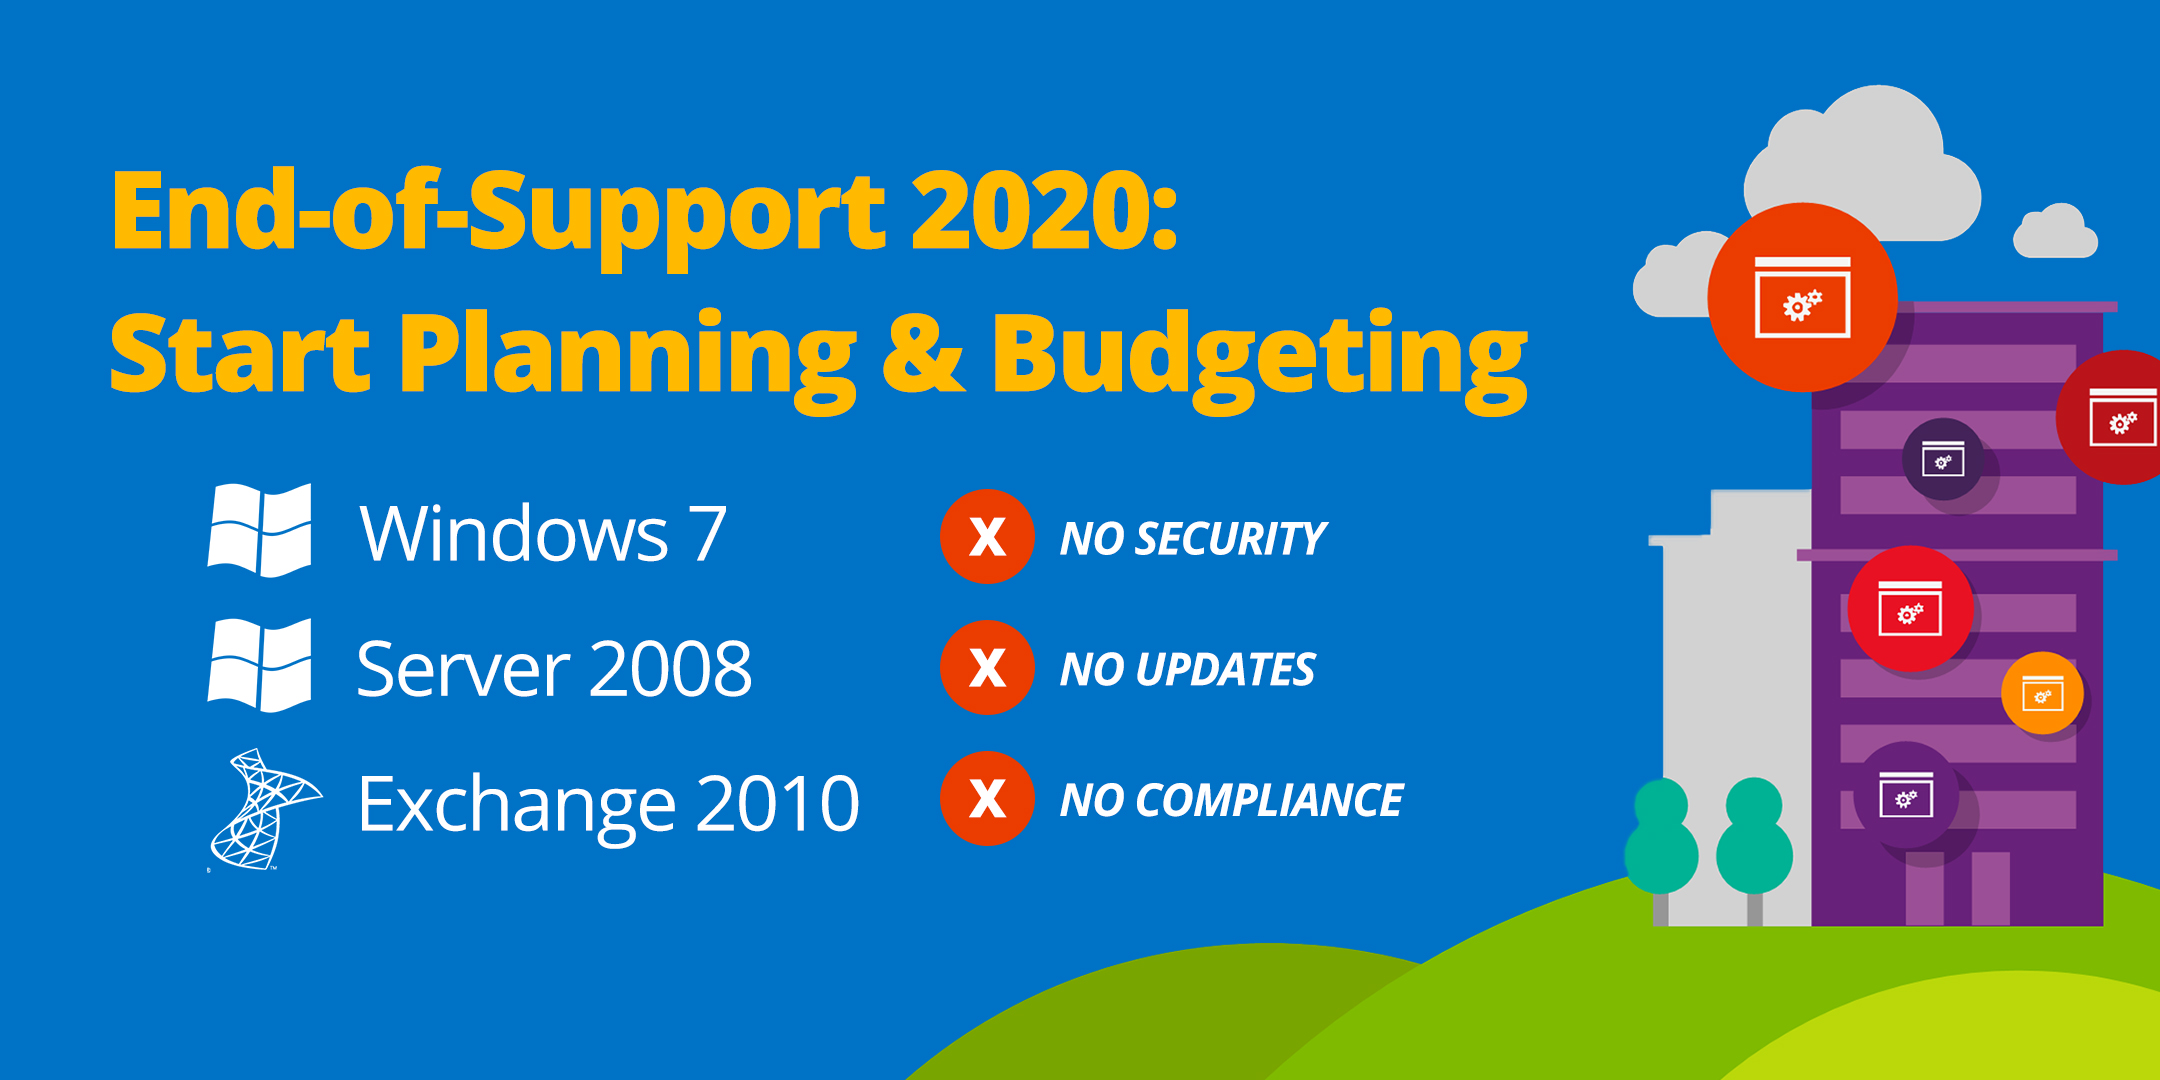 Microsoft products going "End of Life" in 2020 Windows 7, Server 2008 R2, SBS Exchange 2010, Office 2010, Office 2016 — ATS Solutions